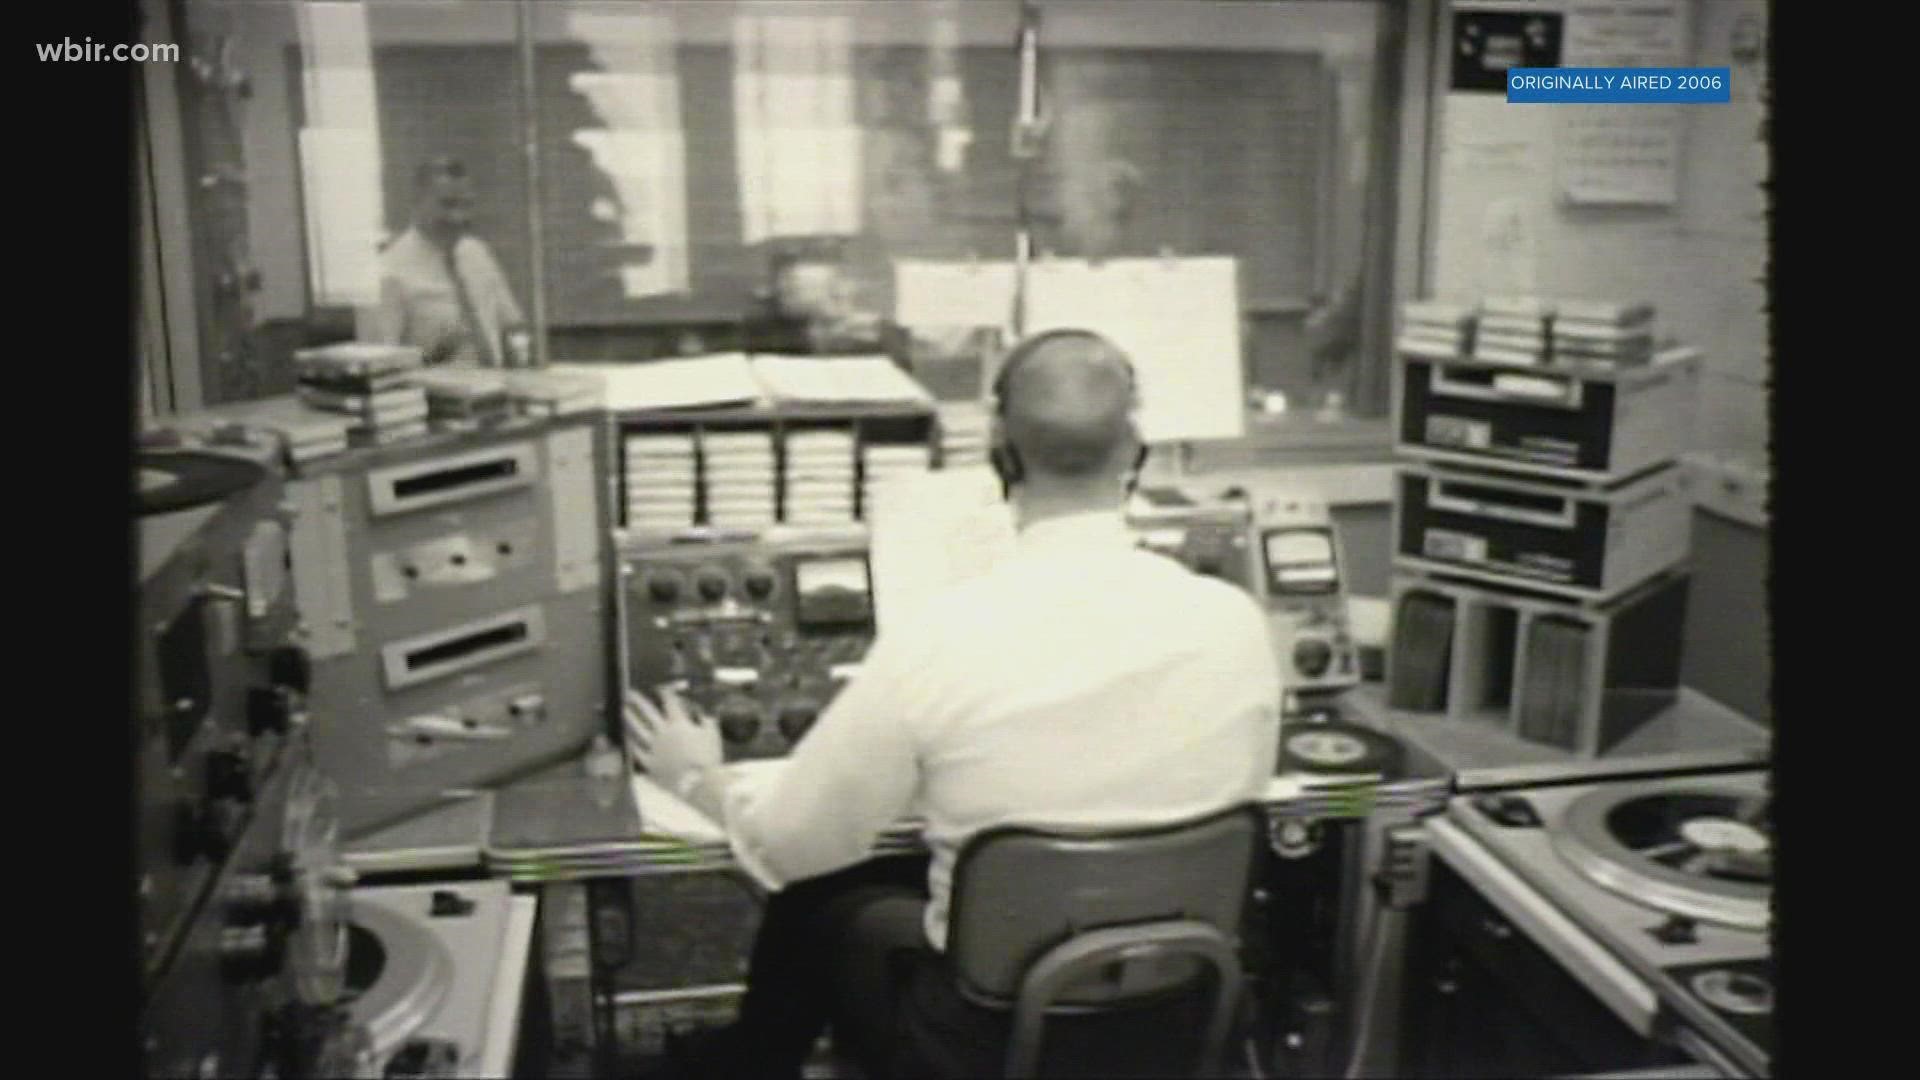 On August 12, 1956 Channel 10 signed on the air. Here's a look from our 50th anniversary from 2006. Aug. 12, 2021-4pm.